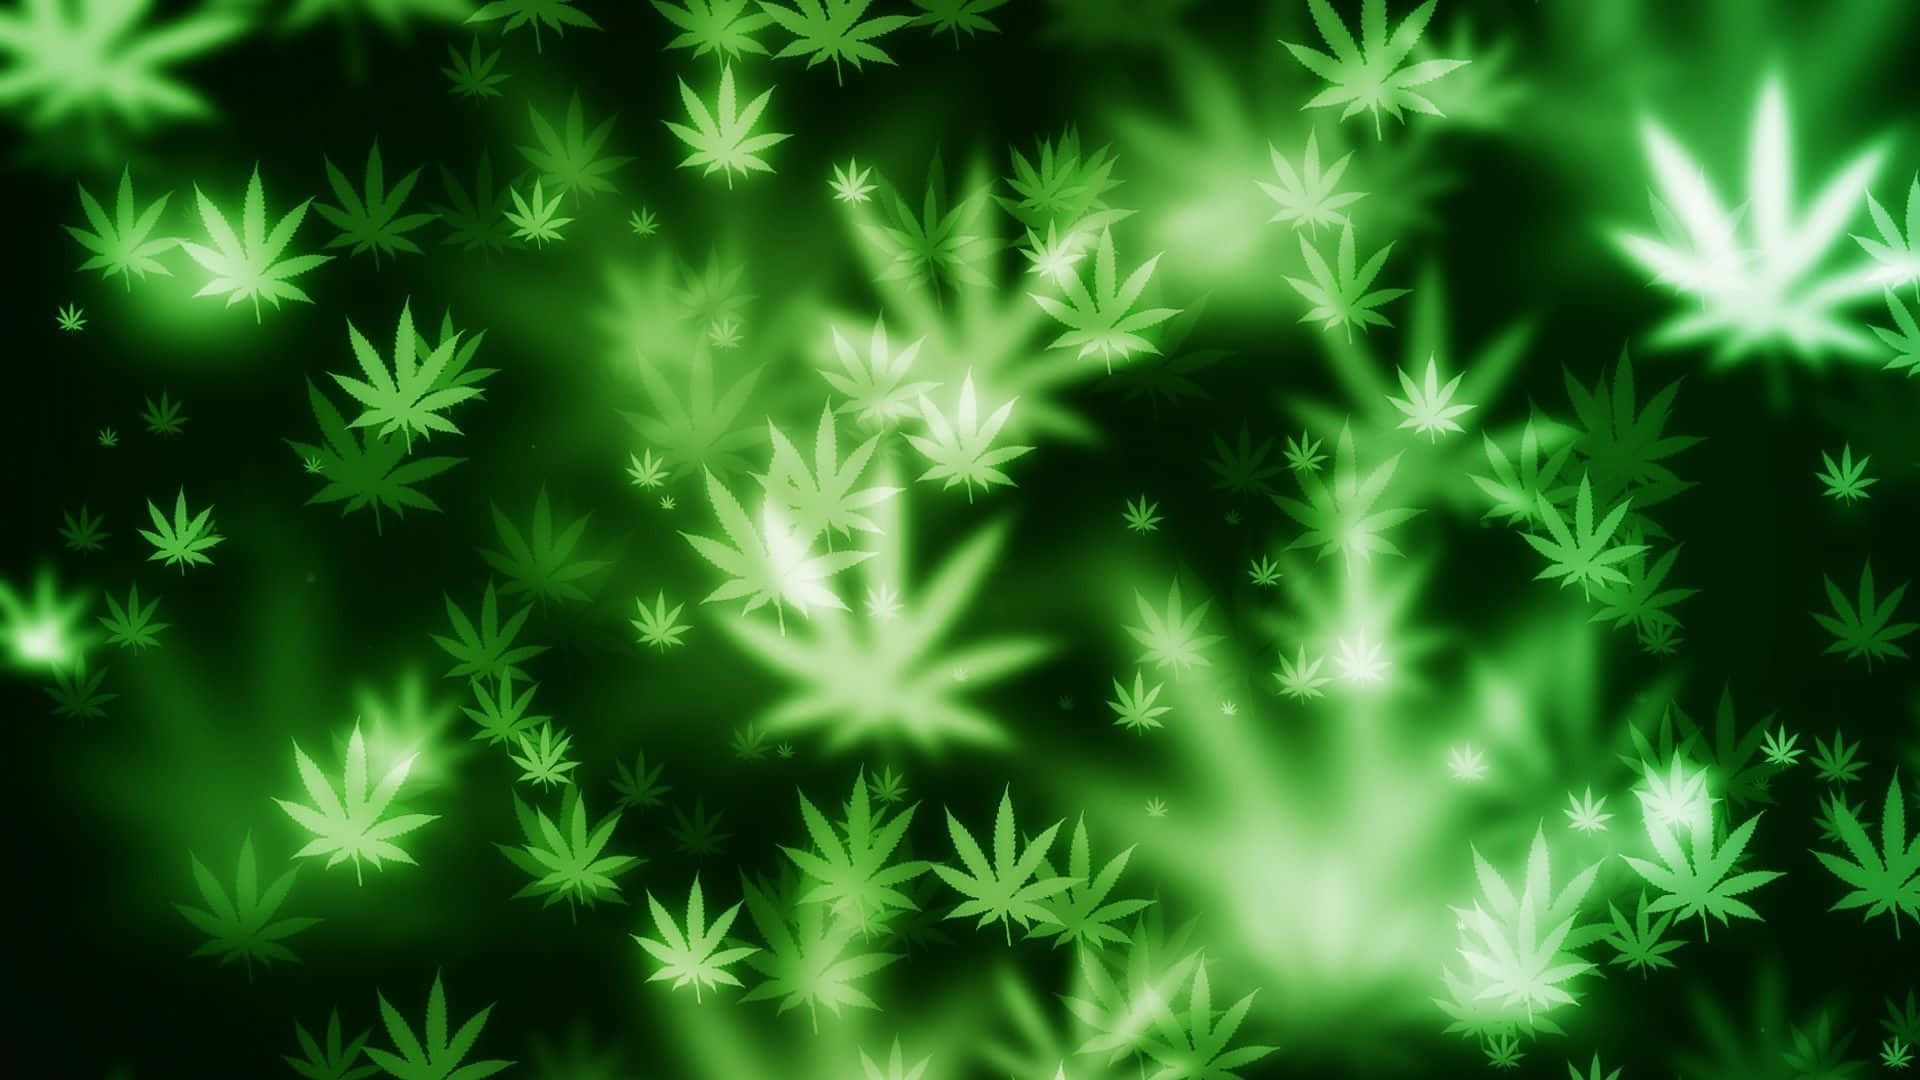 Free Psychedelic Weed Wallpaper Downloads, [100+] Psychedelic Weed  Wallpapers for FREE 